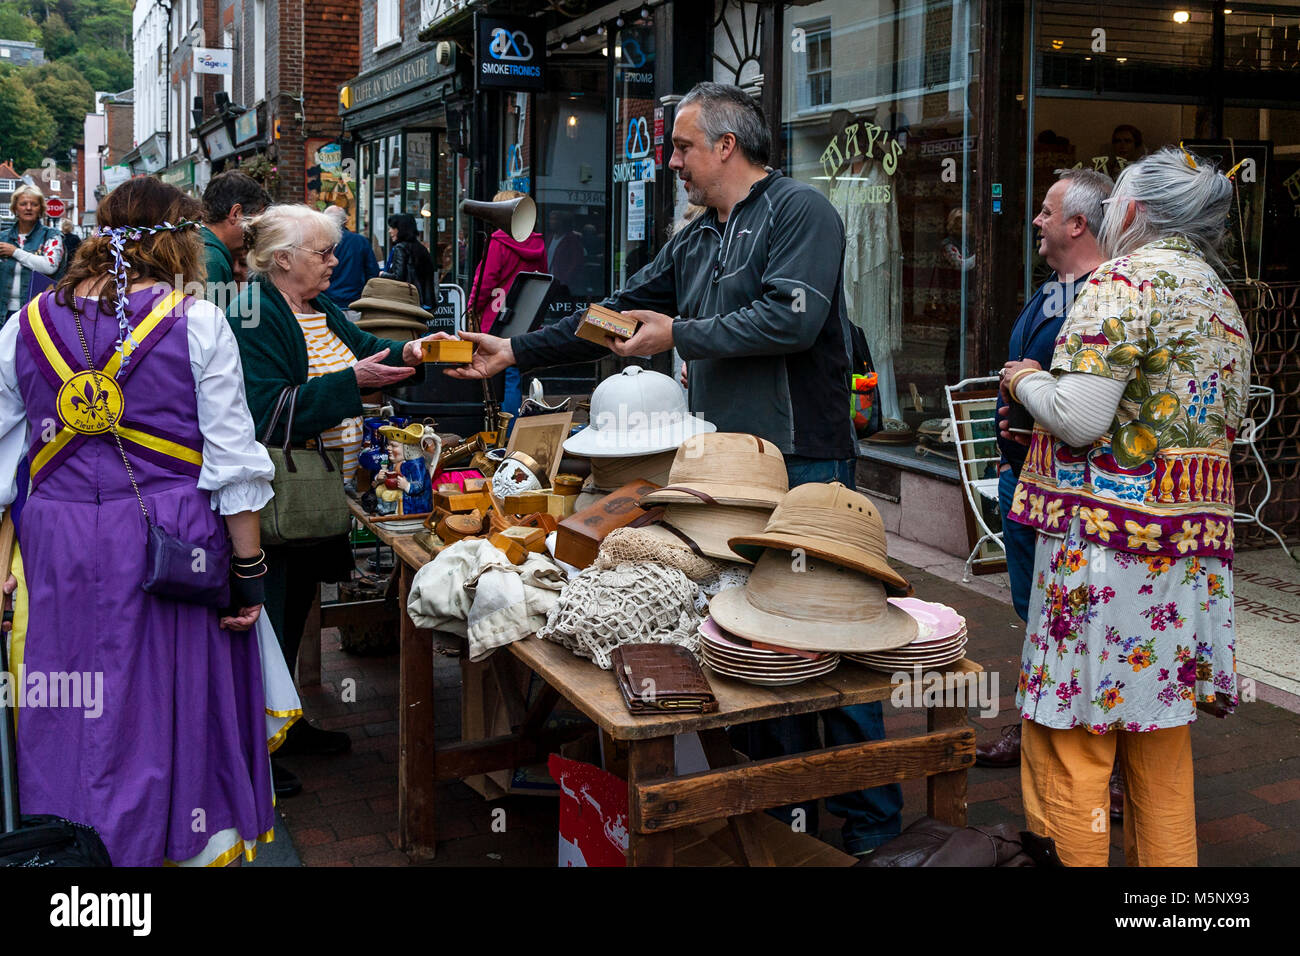 People Browsing and Buying Items From A Bric A Brac Stall, High Street, Lewes, Sussex, UK Stock Photo